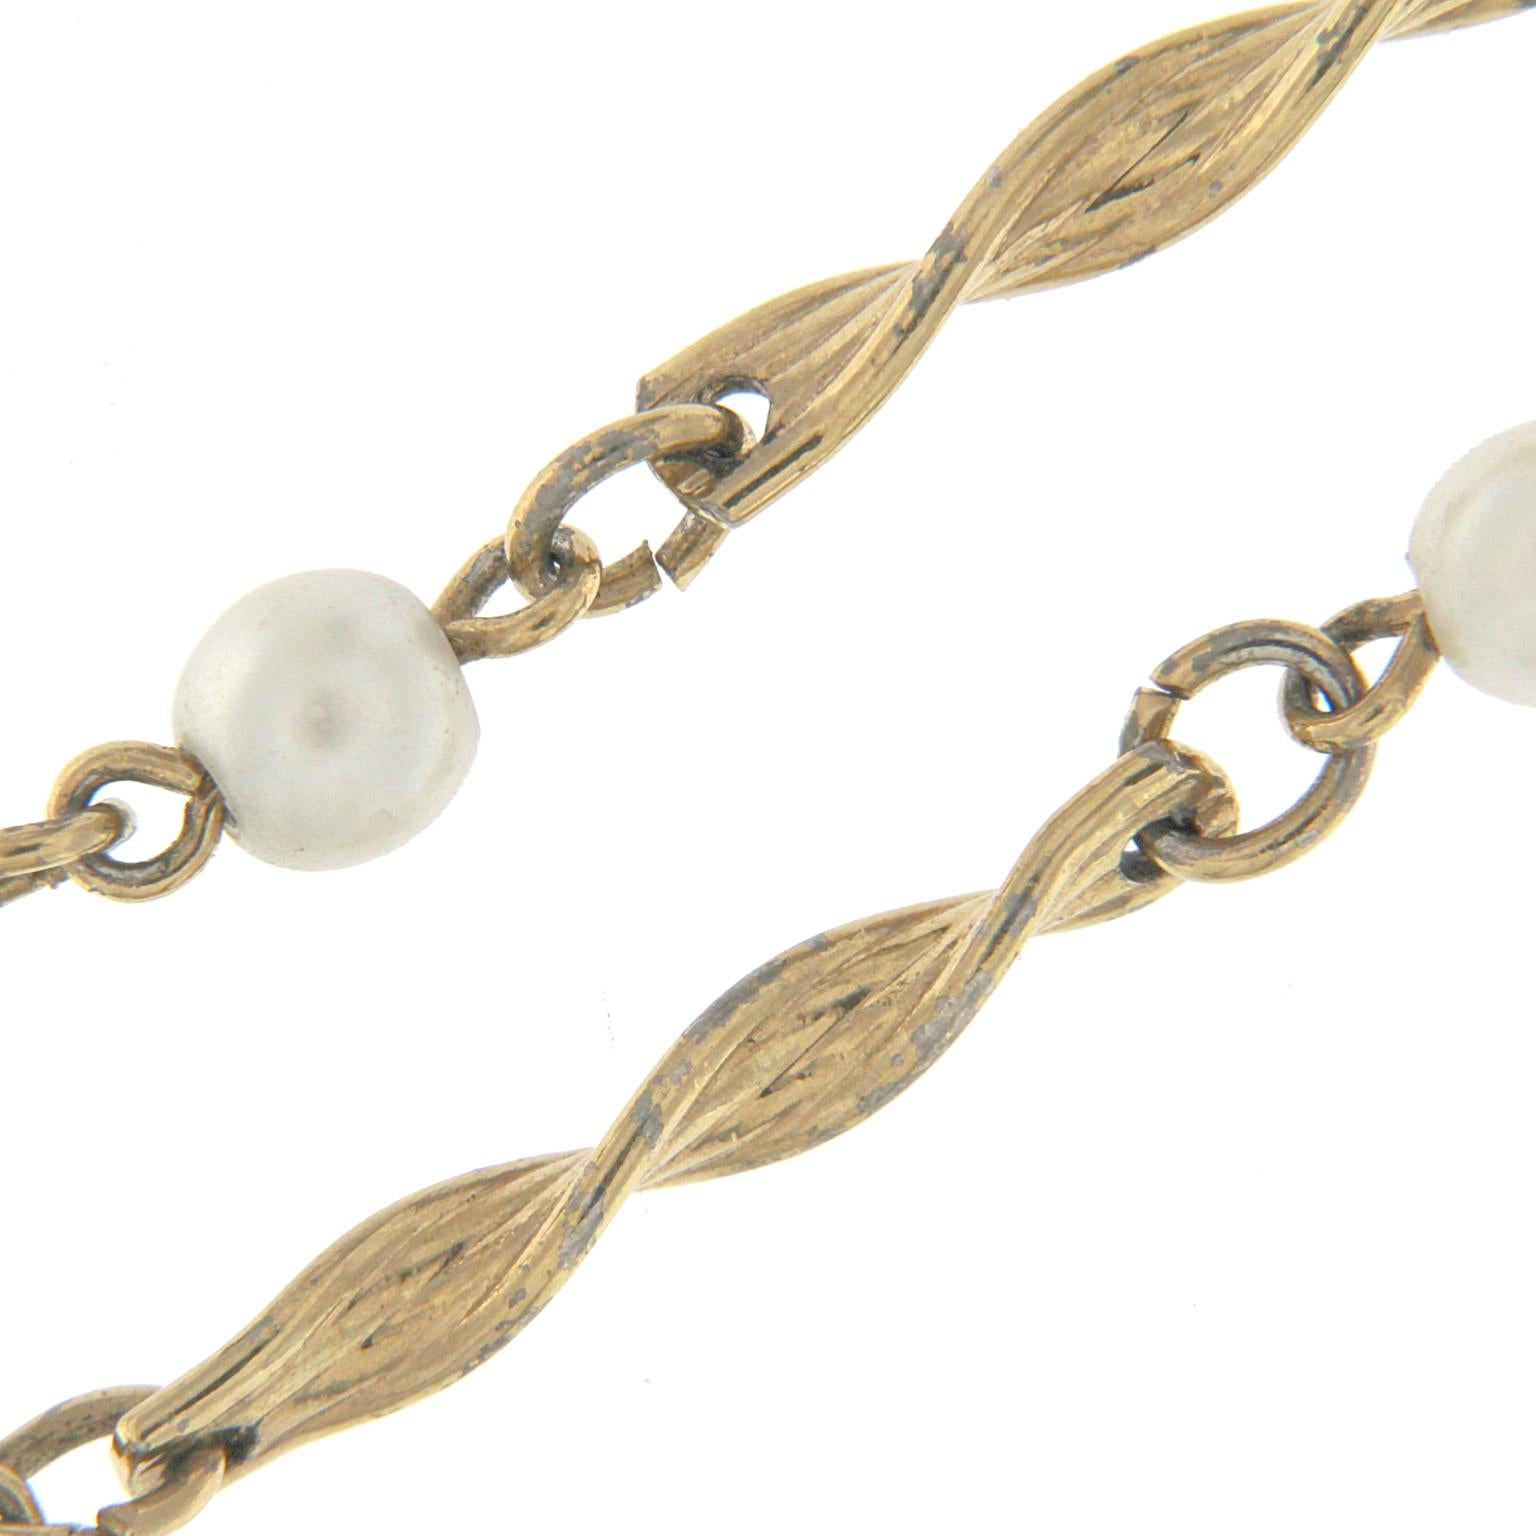 18 kt yellow plated chain with white pearls
The total weight of the gold is not exactly known



